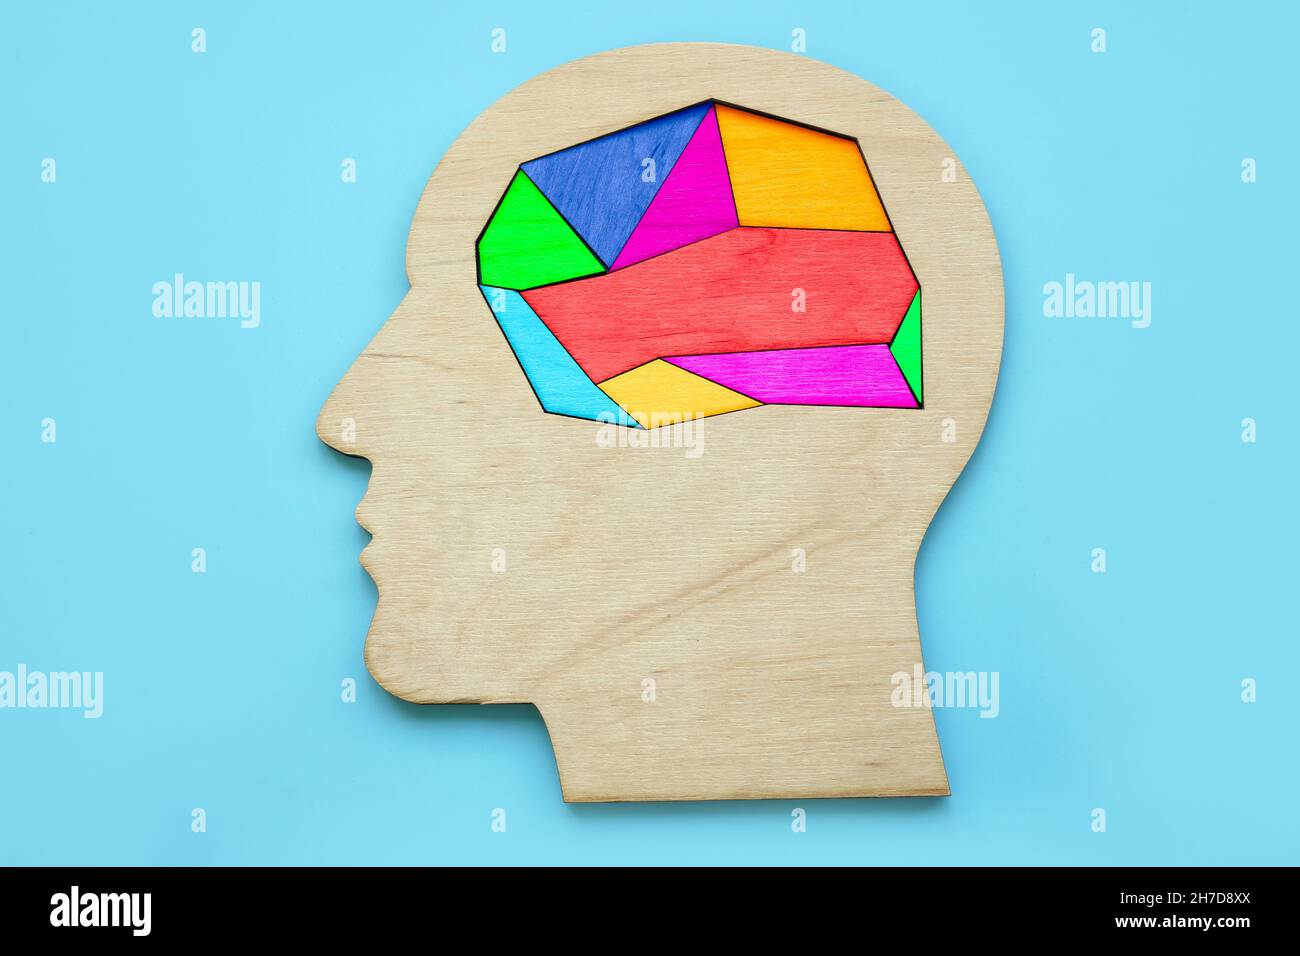 Creativity and positive emotions. Multi-colored human brain. Stock Photo